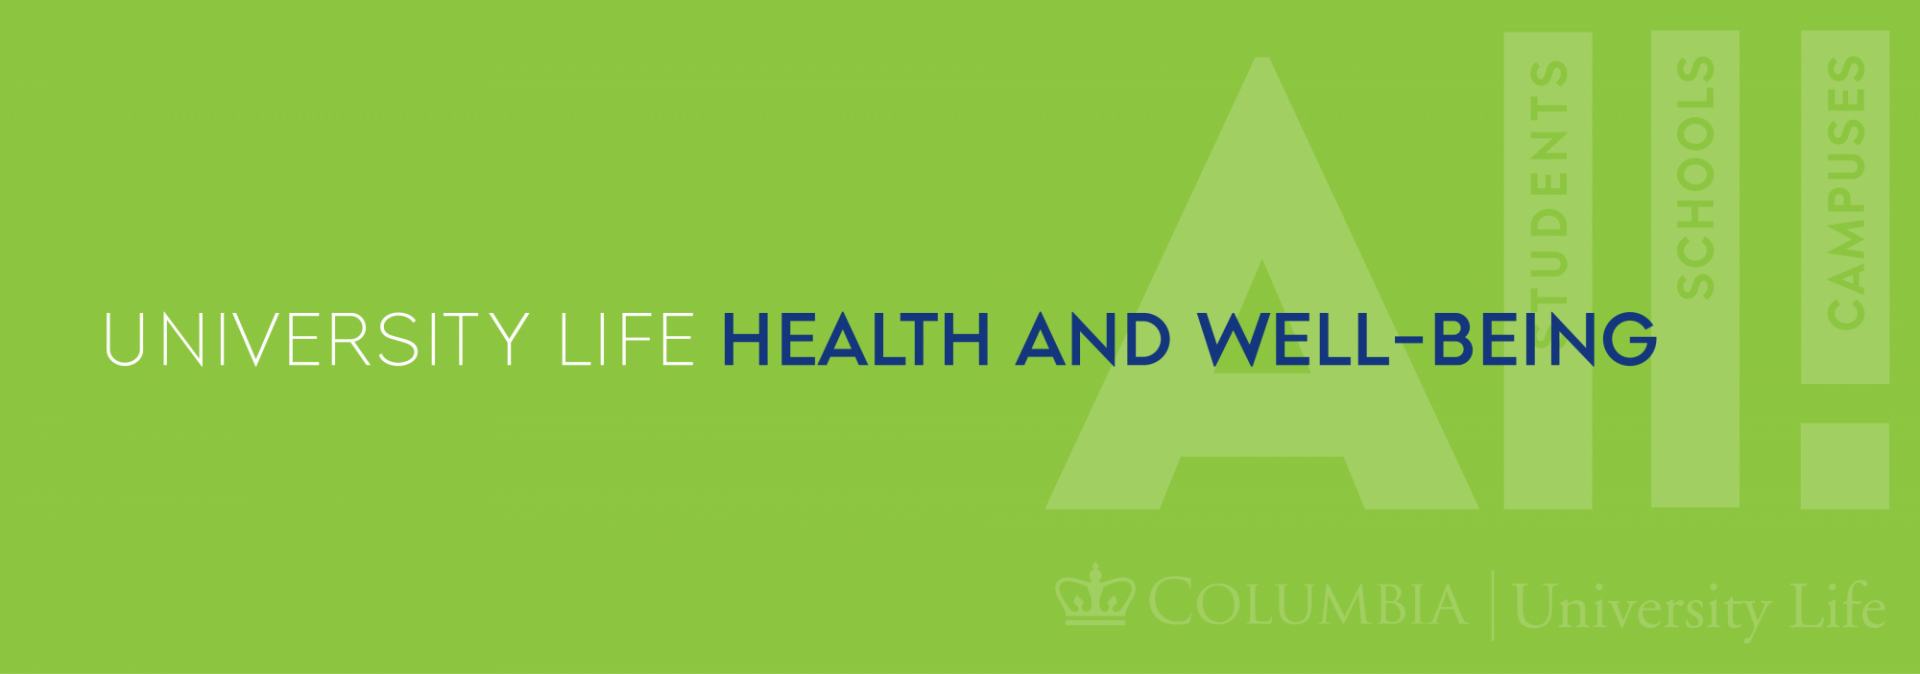 Health and Well-Being Newsletter header